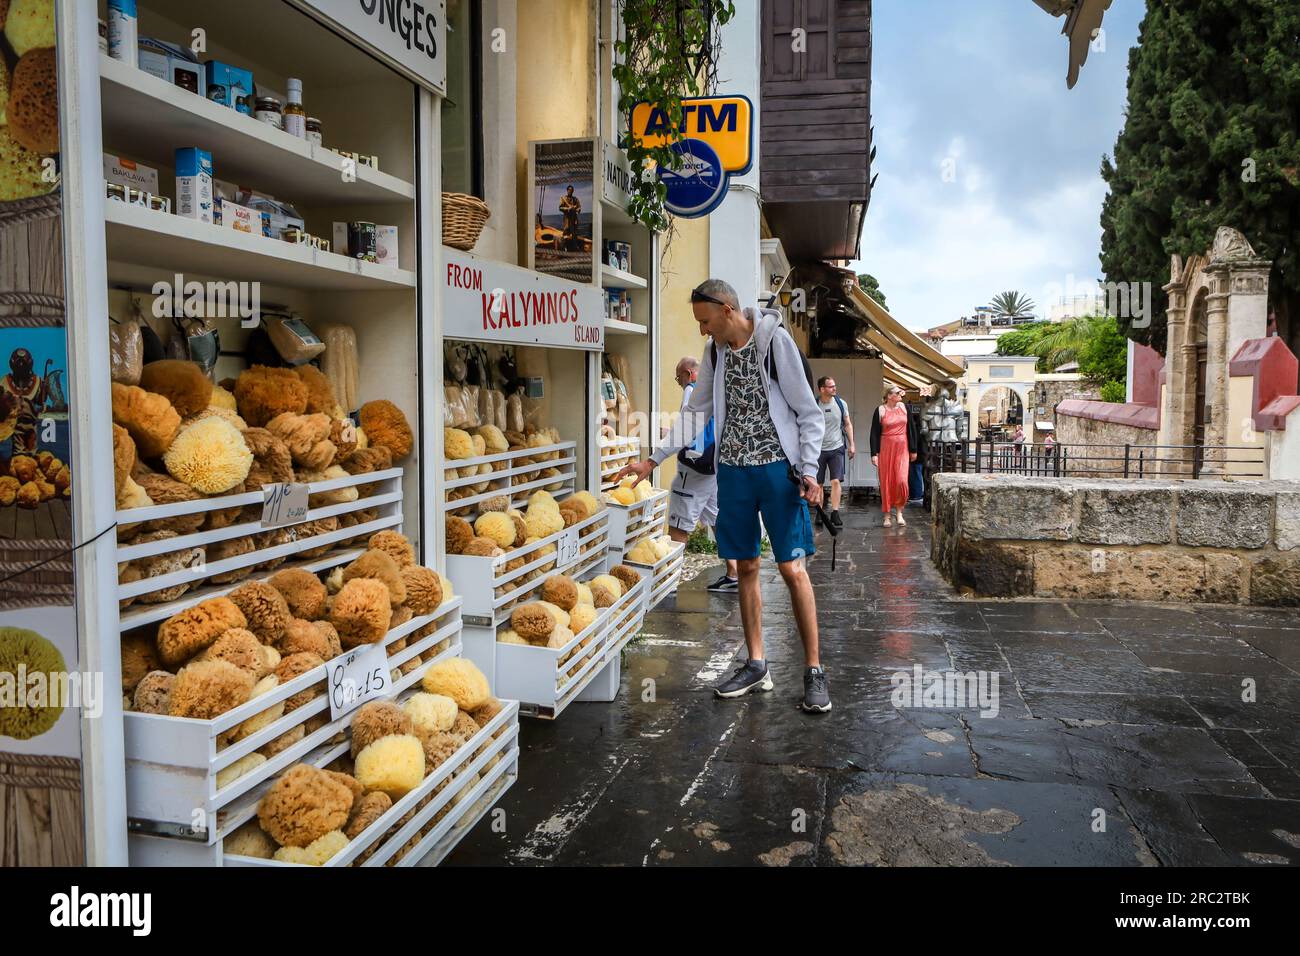 Rhodes, Greece - May 27, 2023: A gift shop with with natural greek sponges from Kalymnos.  A tourist customer outside of the store. Stock Photo